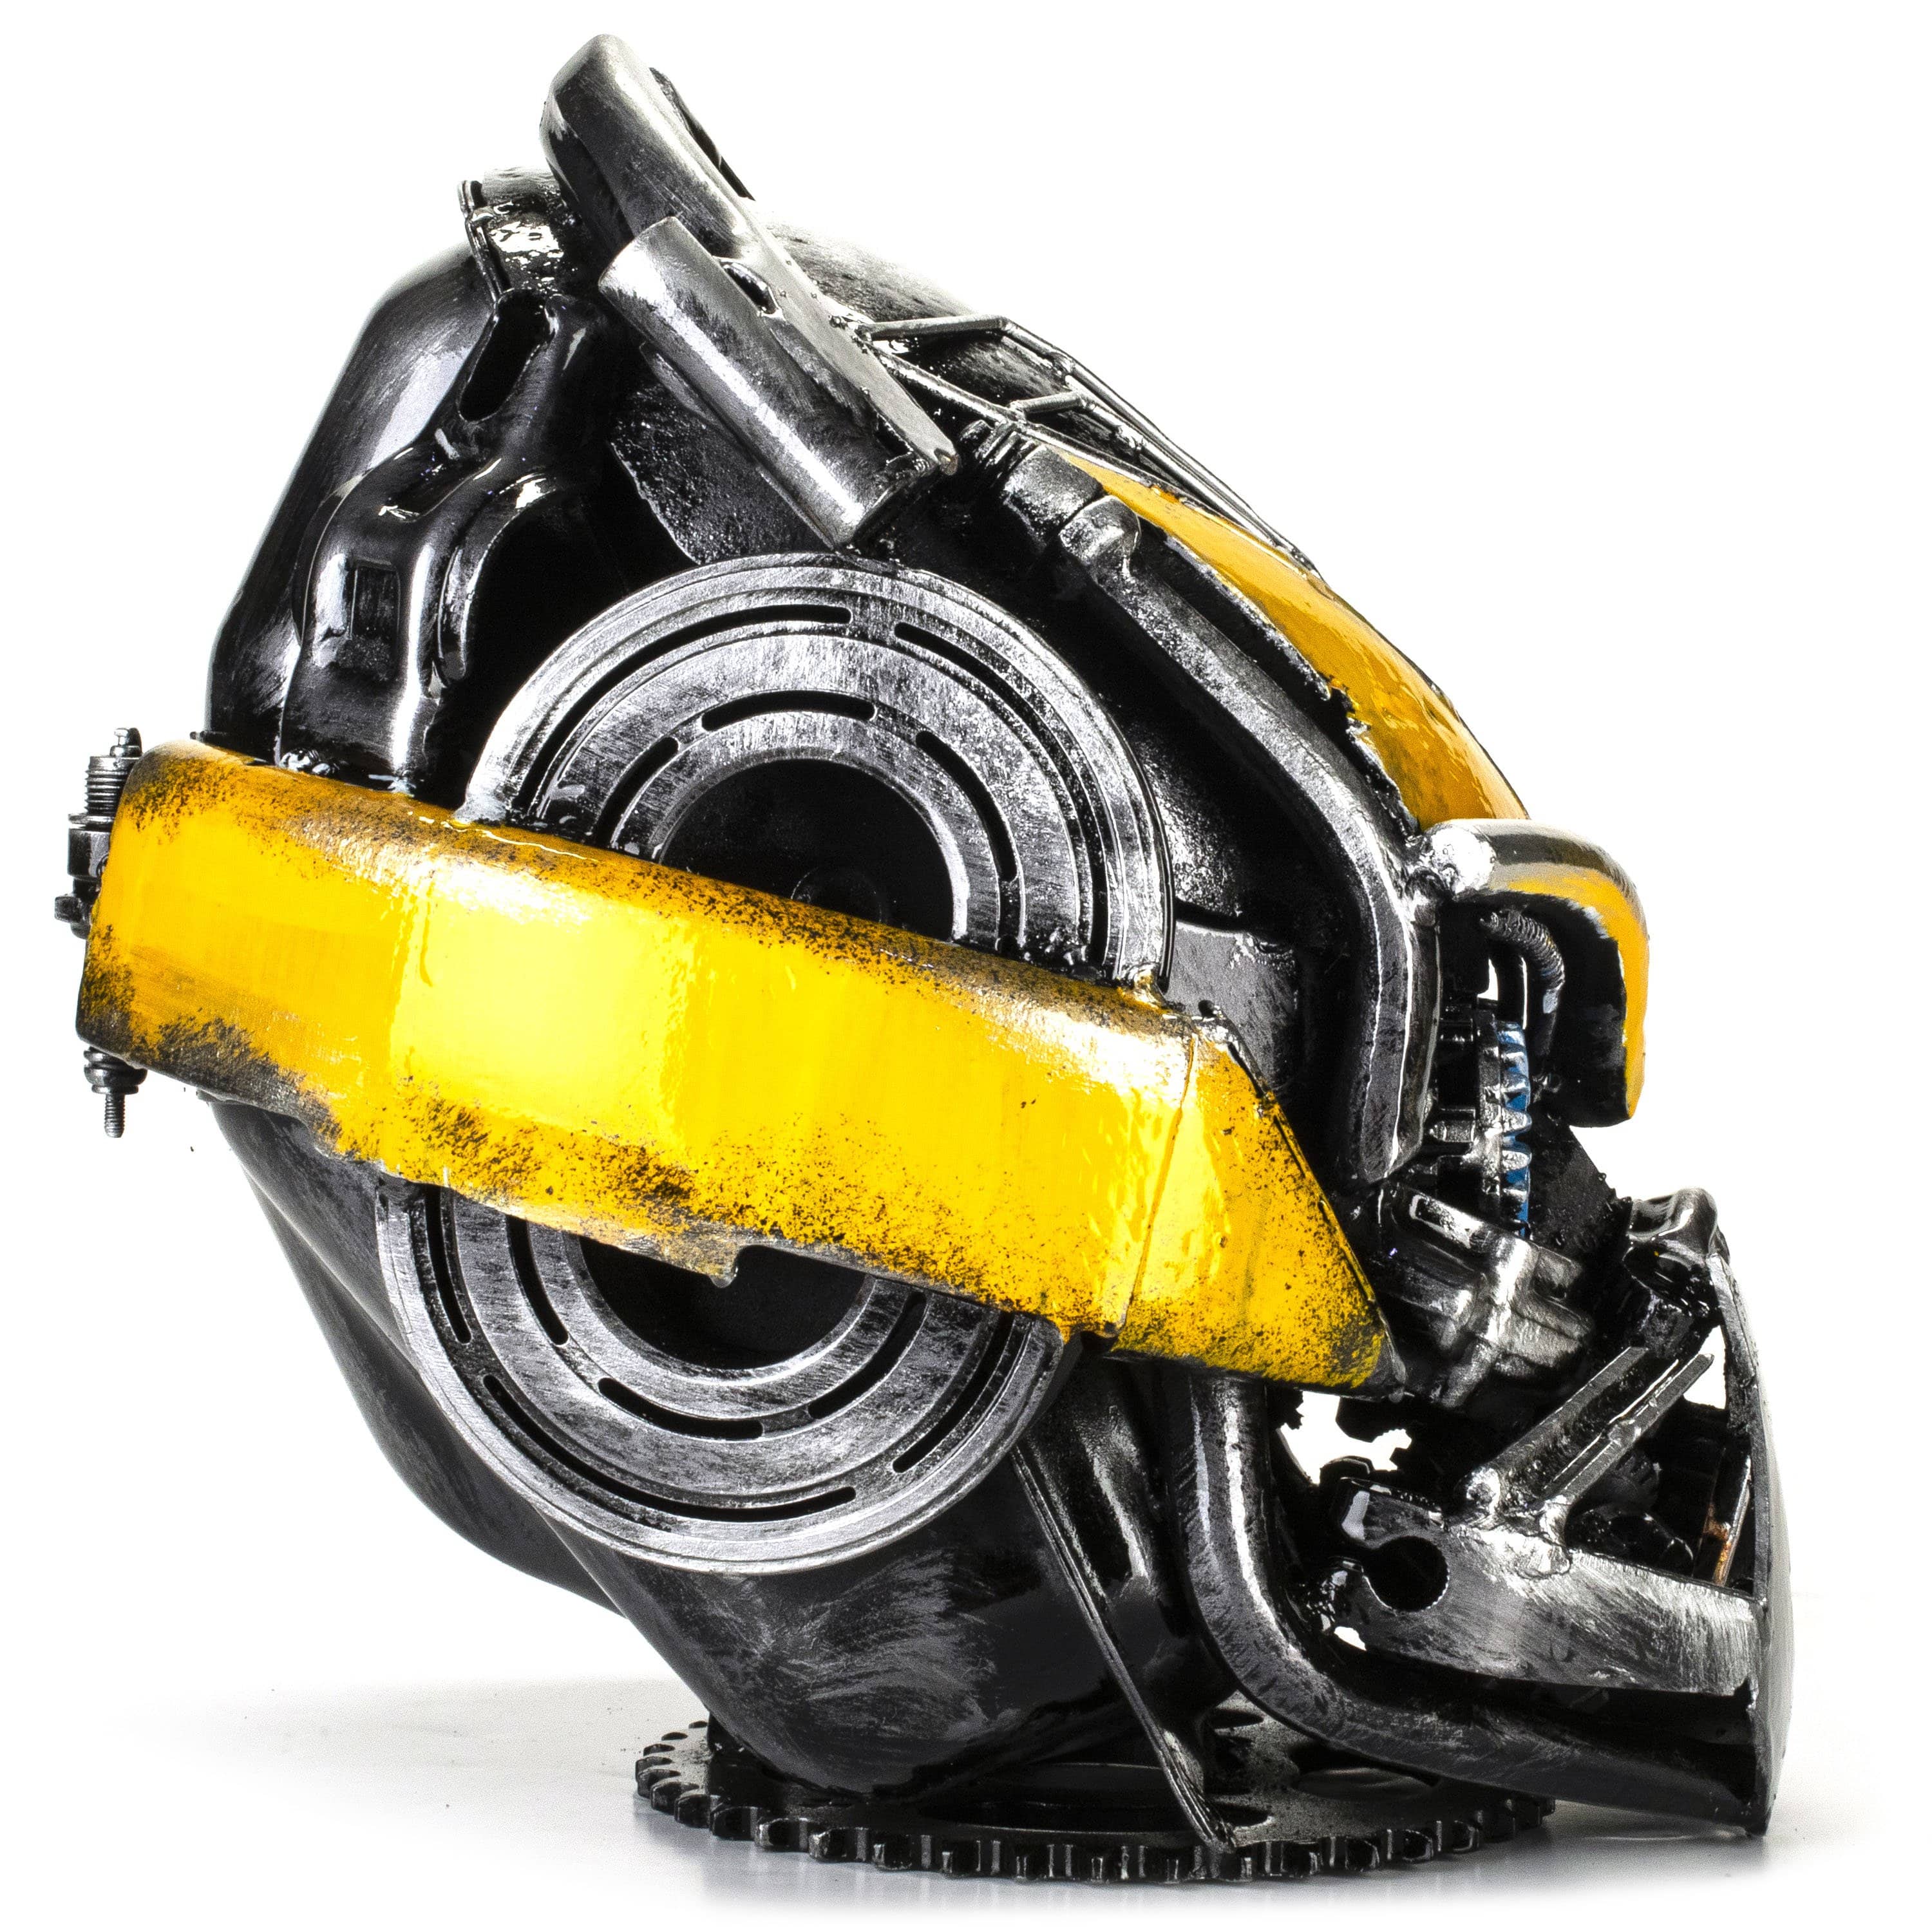 Kalifano Recycled Metal Art BumbleBee Head Inspired Recycled Metal Art Sculpture RMS-HEAD-BB